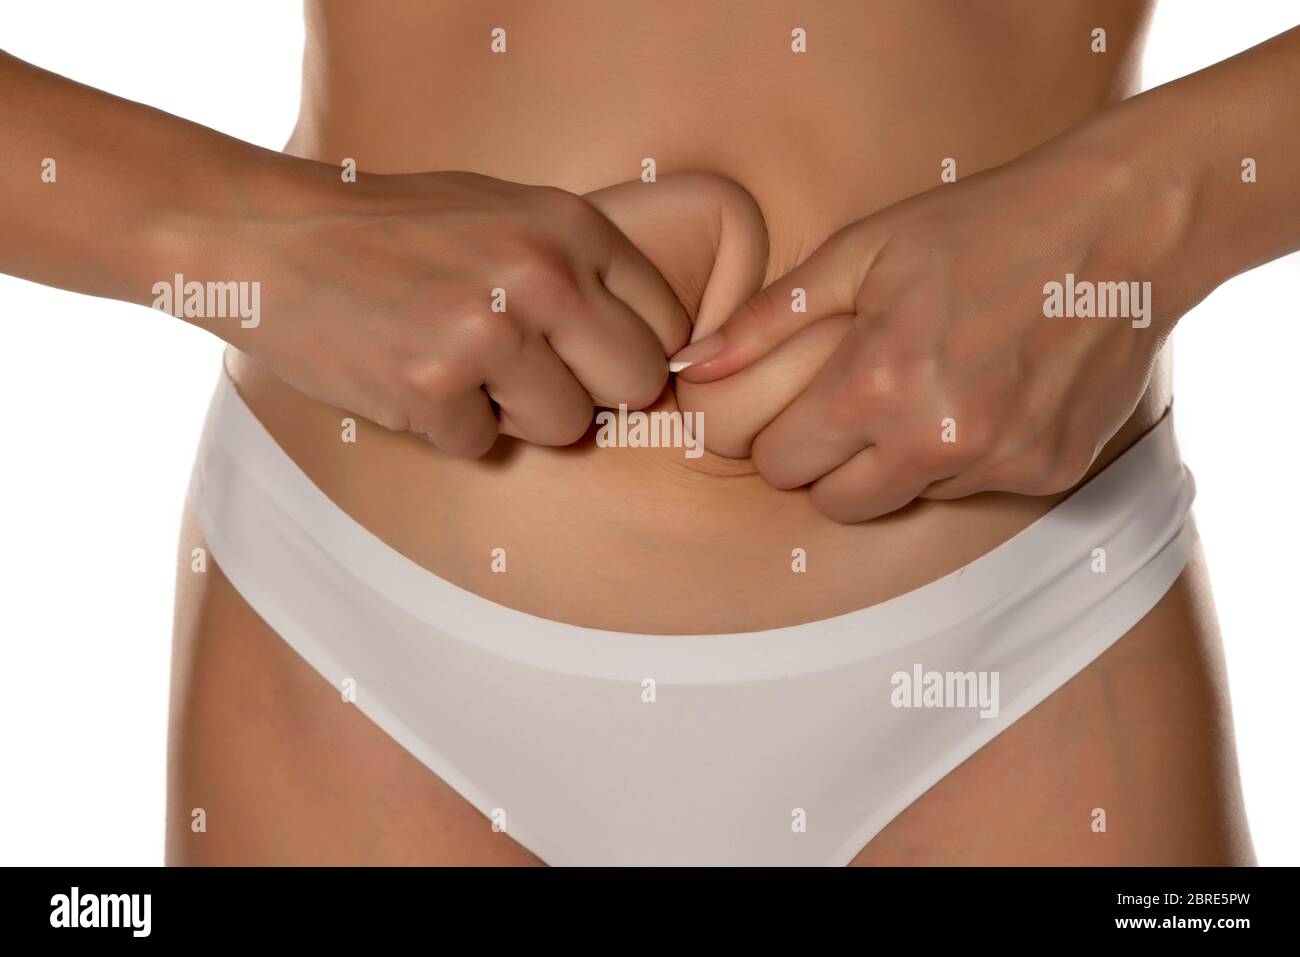 woman squeezing her belly fat on white background Stock Photo